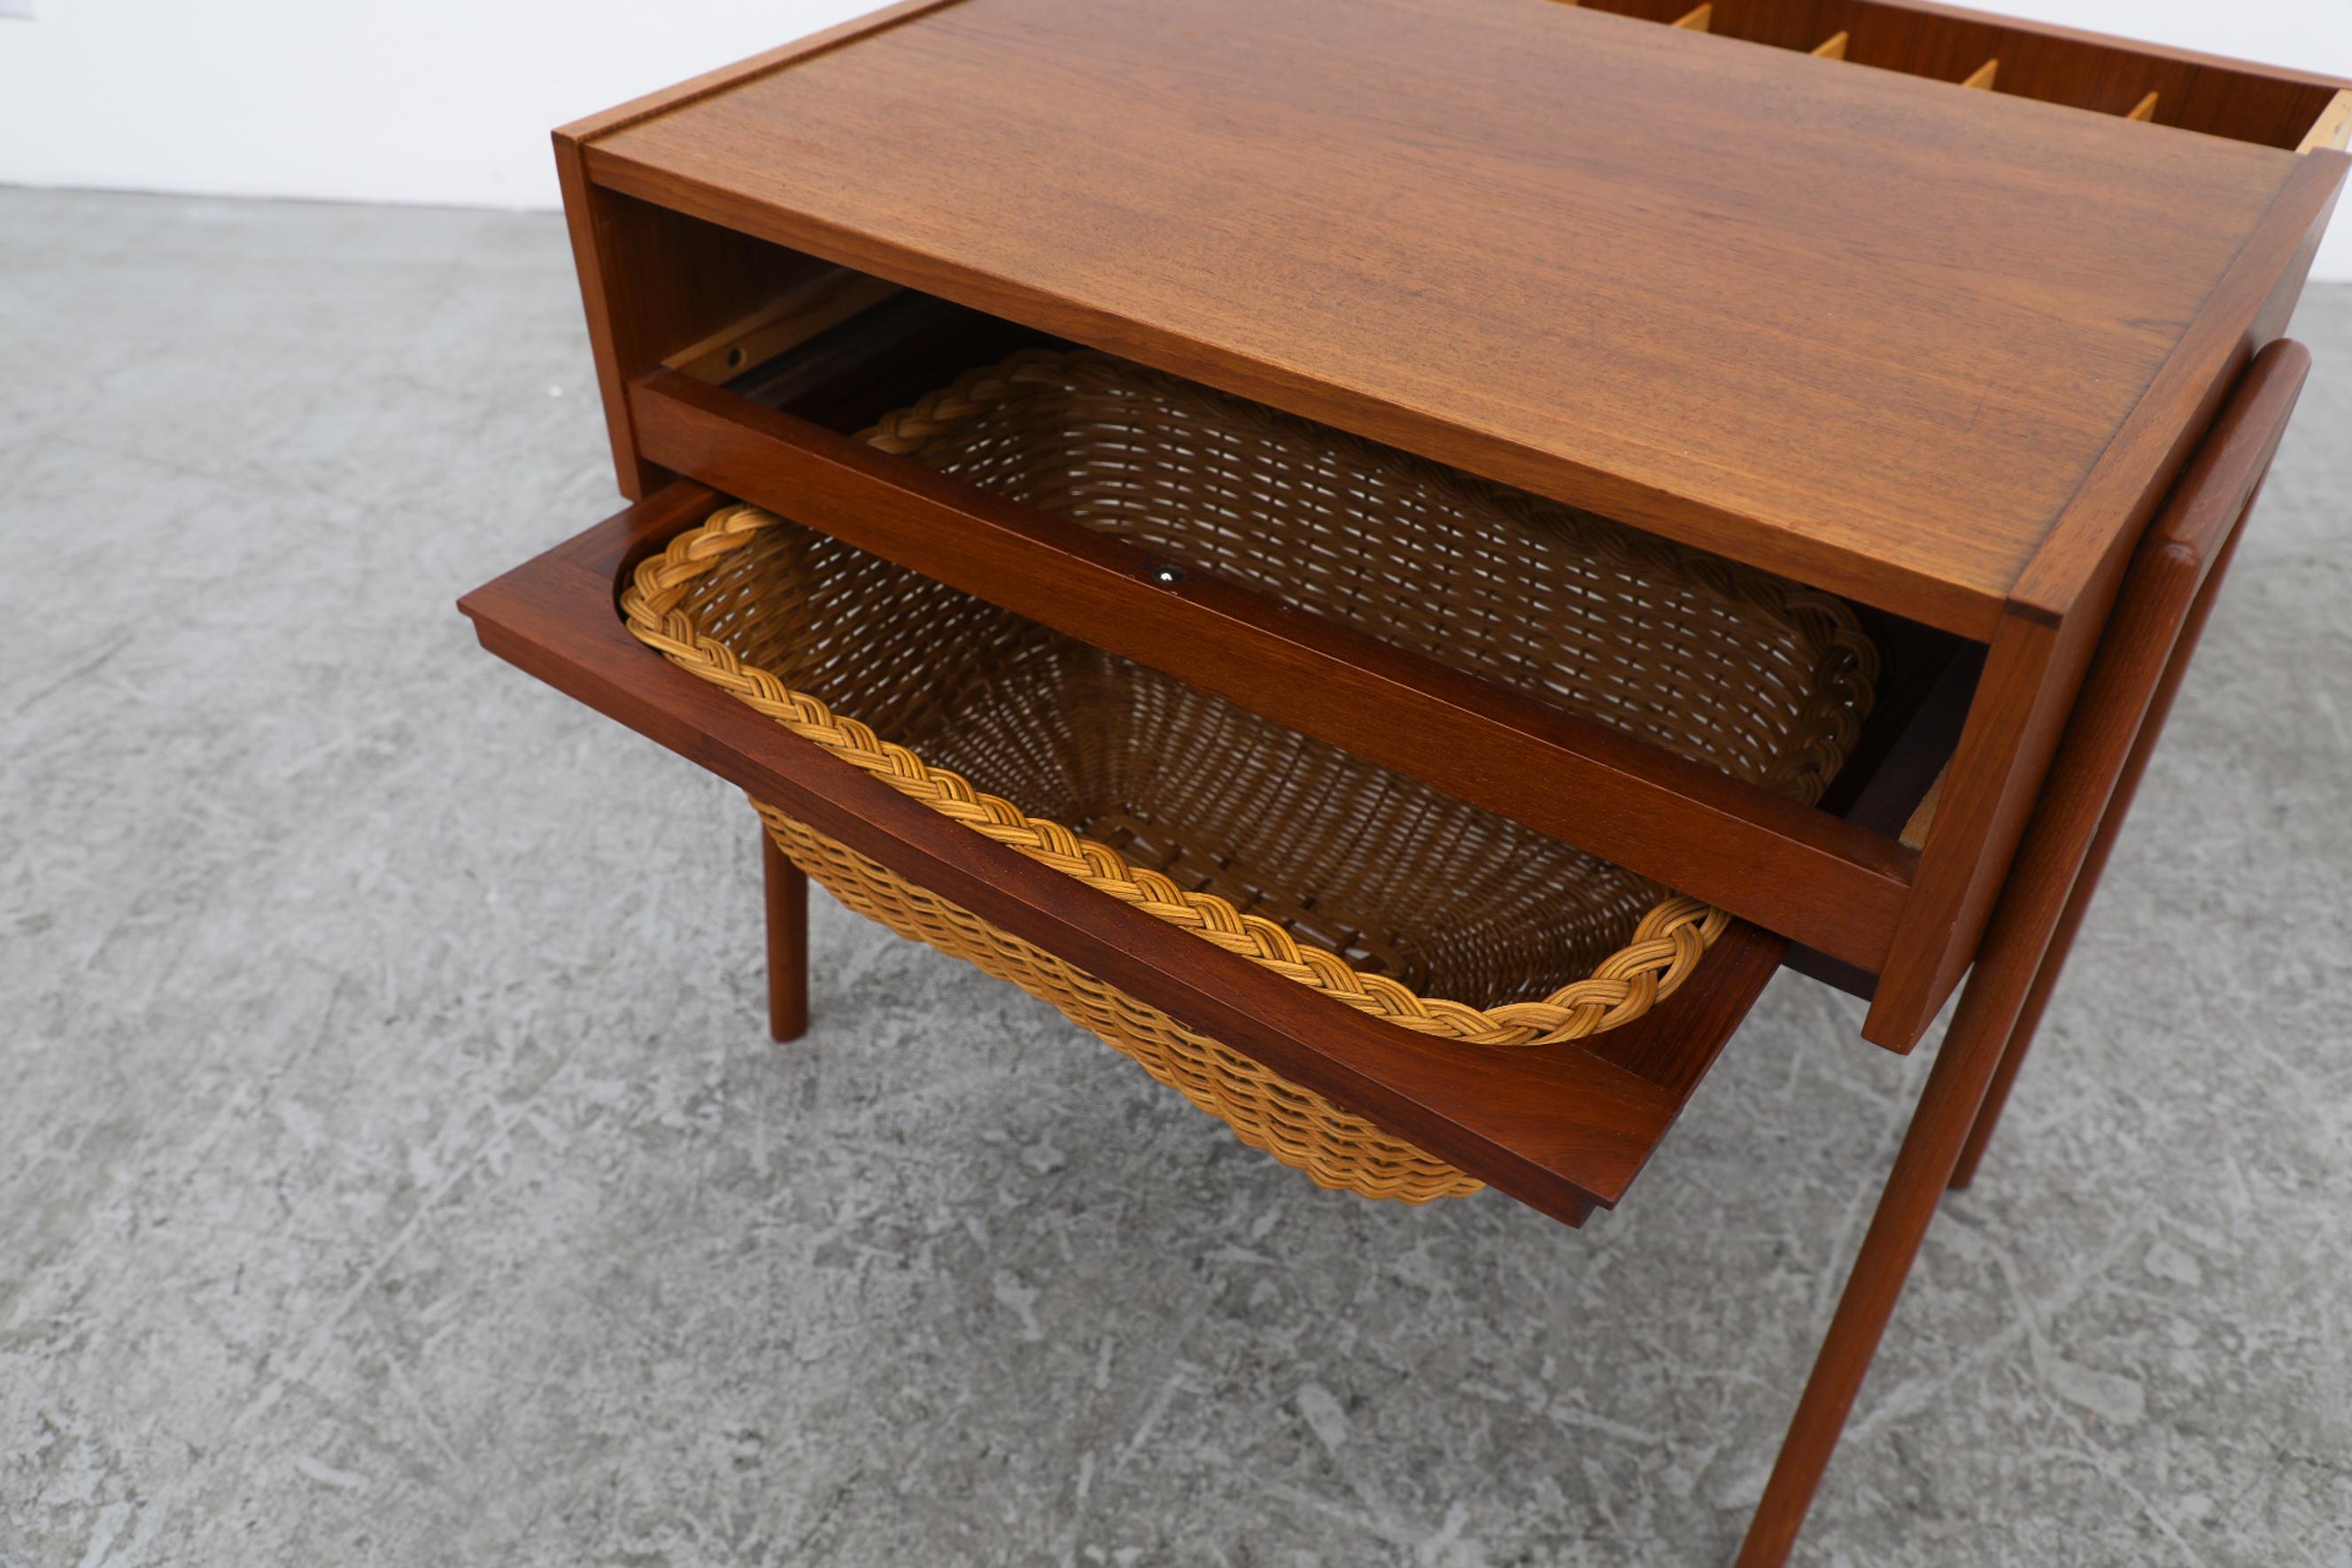 Rattan Mid-Century Danish Teak Sewing Box with Compartmented Drawer & Slide Out Basket For Sale